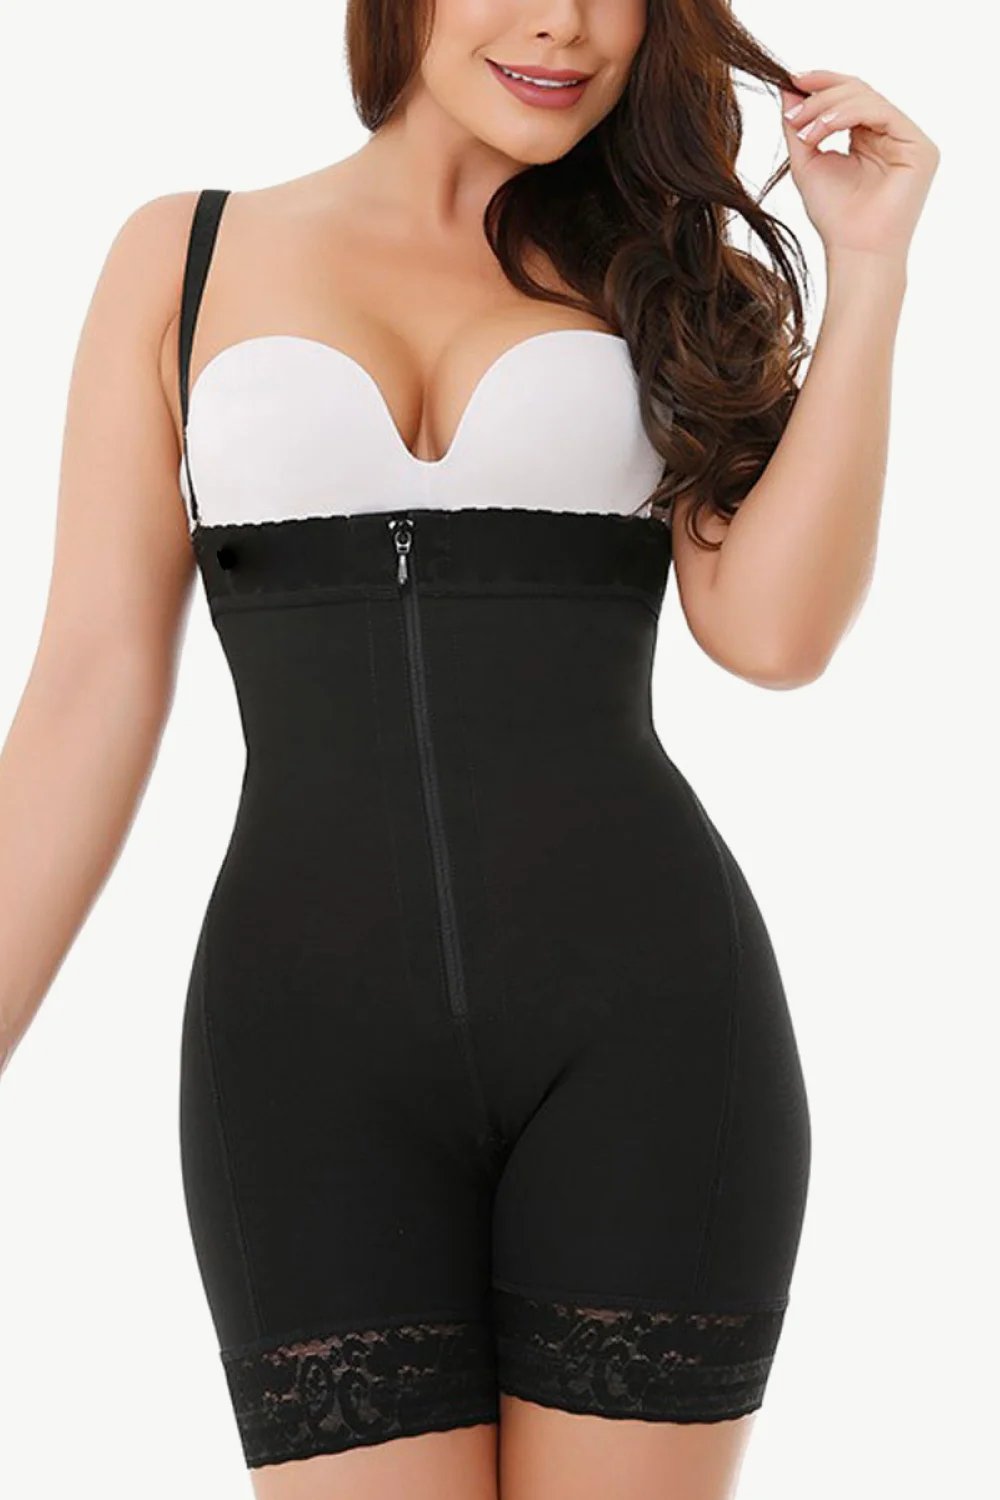 Slimming faja designed for all-day comfort and support.